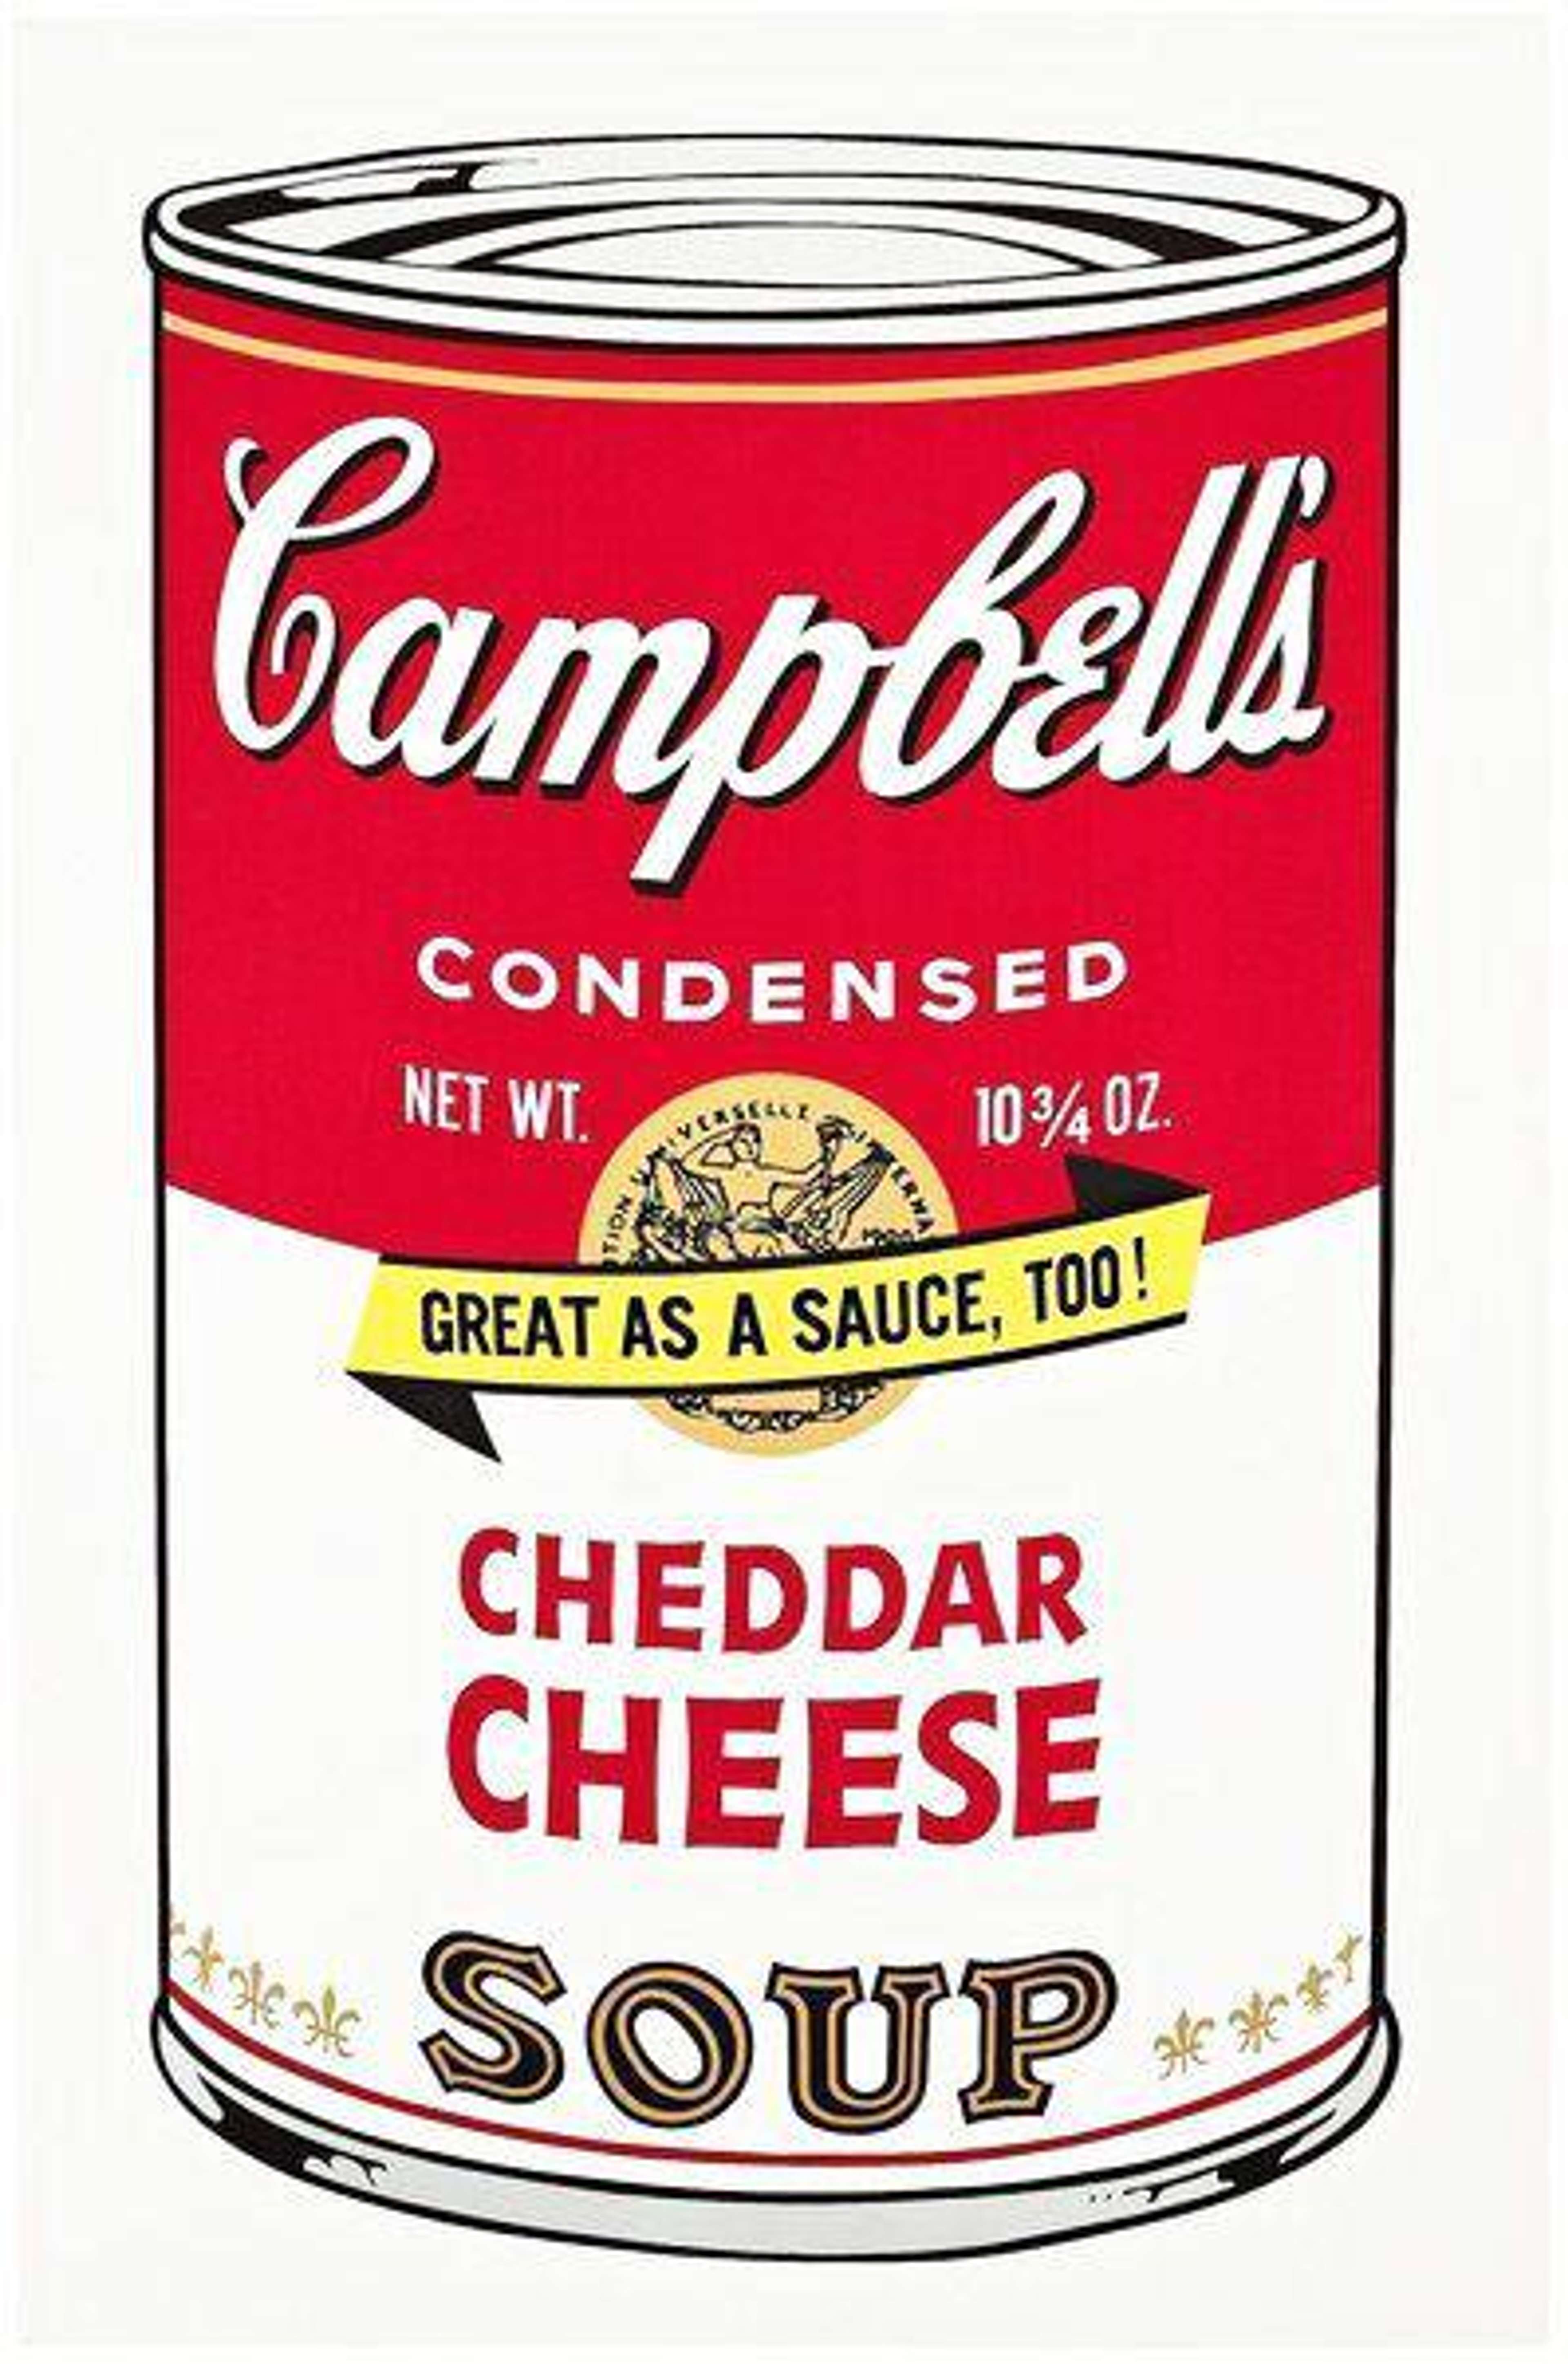 Campbell’s Soup II, Cheddar Cheese (F. & S. II.63) - Signed Print